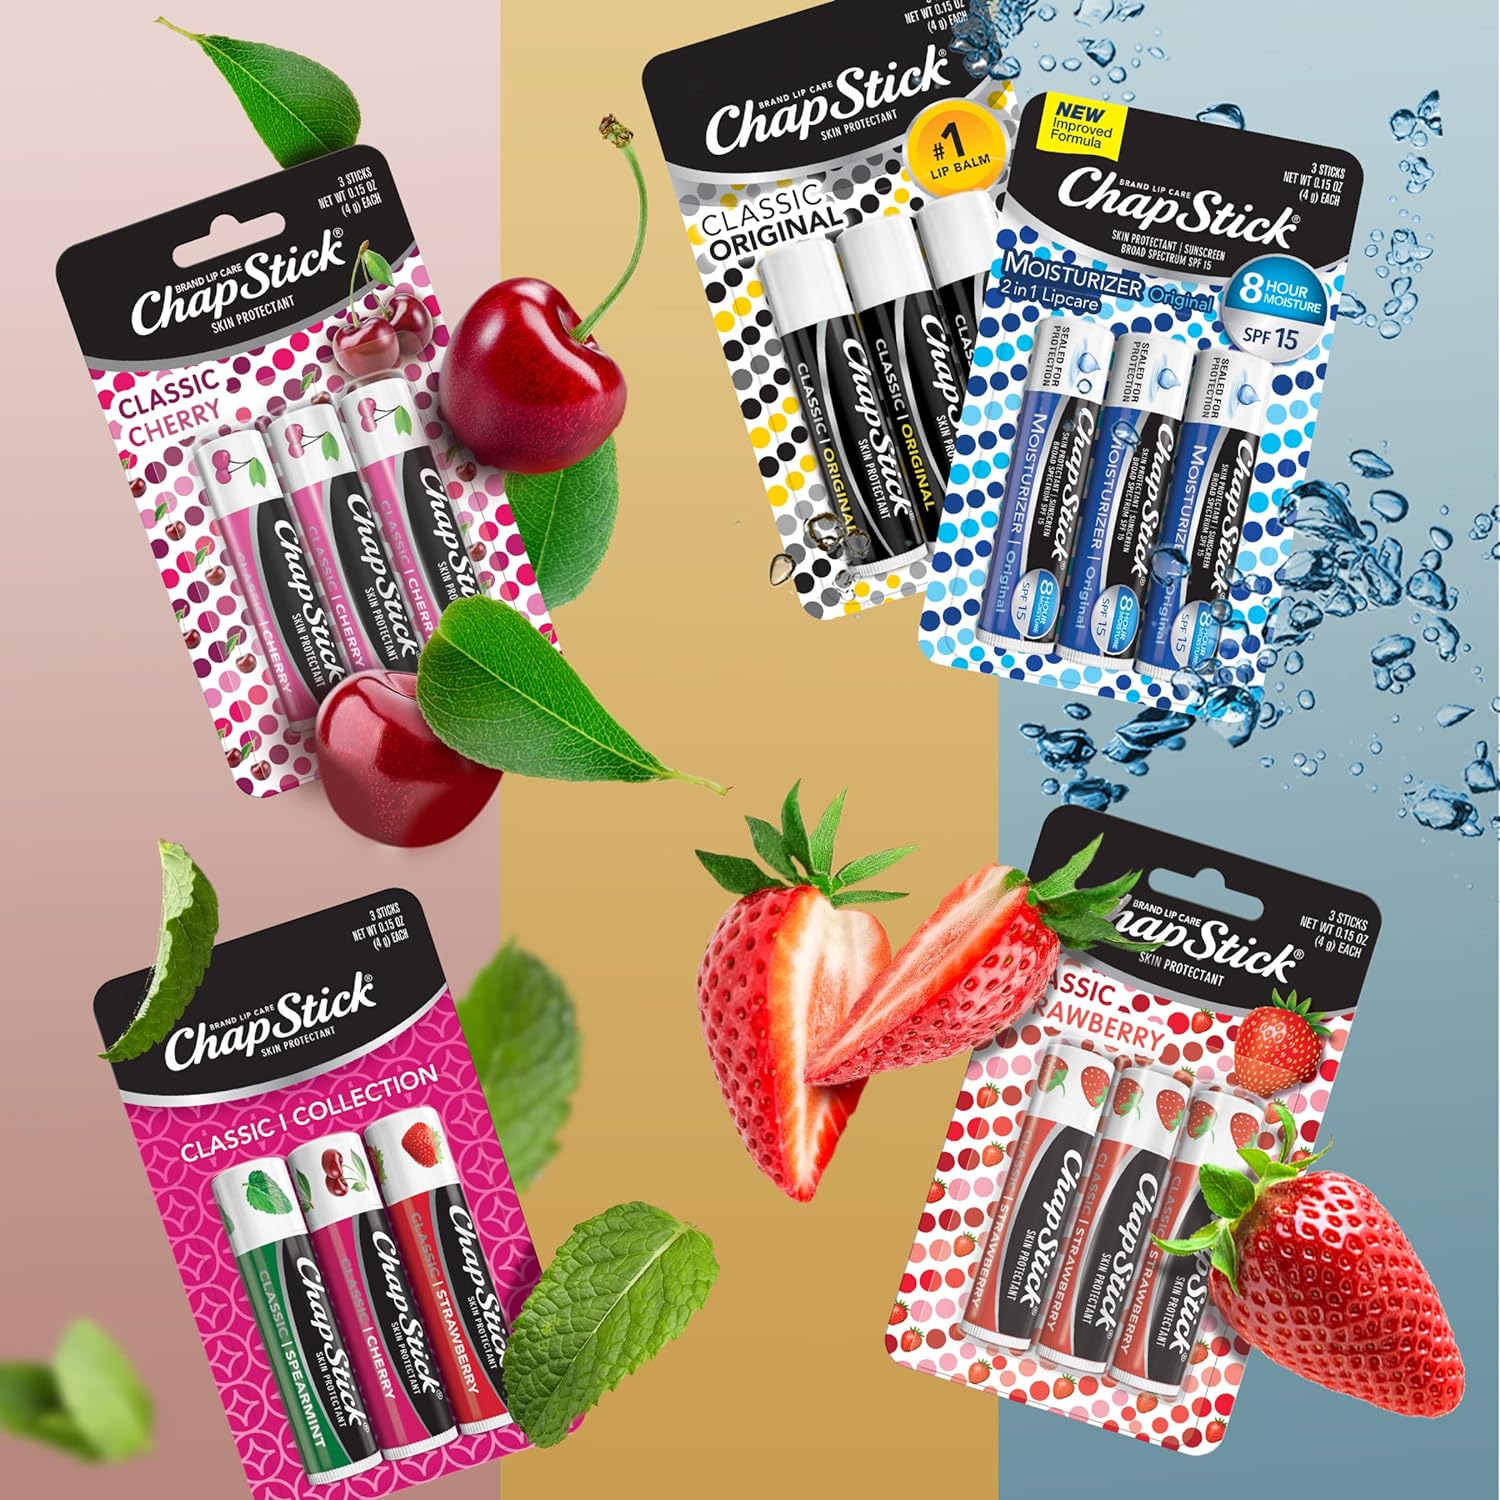 ChapStick Classic Collection Flavored Lip Balm Tubes Pack, Lip Moisturizer - 0.15 Oz (Box of 5 Packs of 3) : Beauty & Personal Care